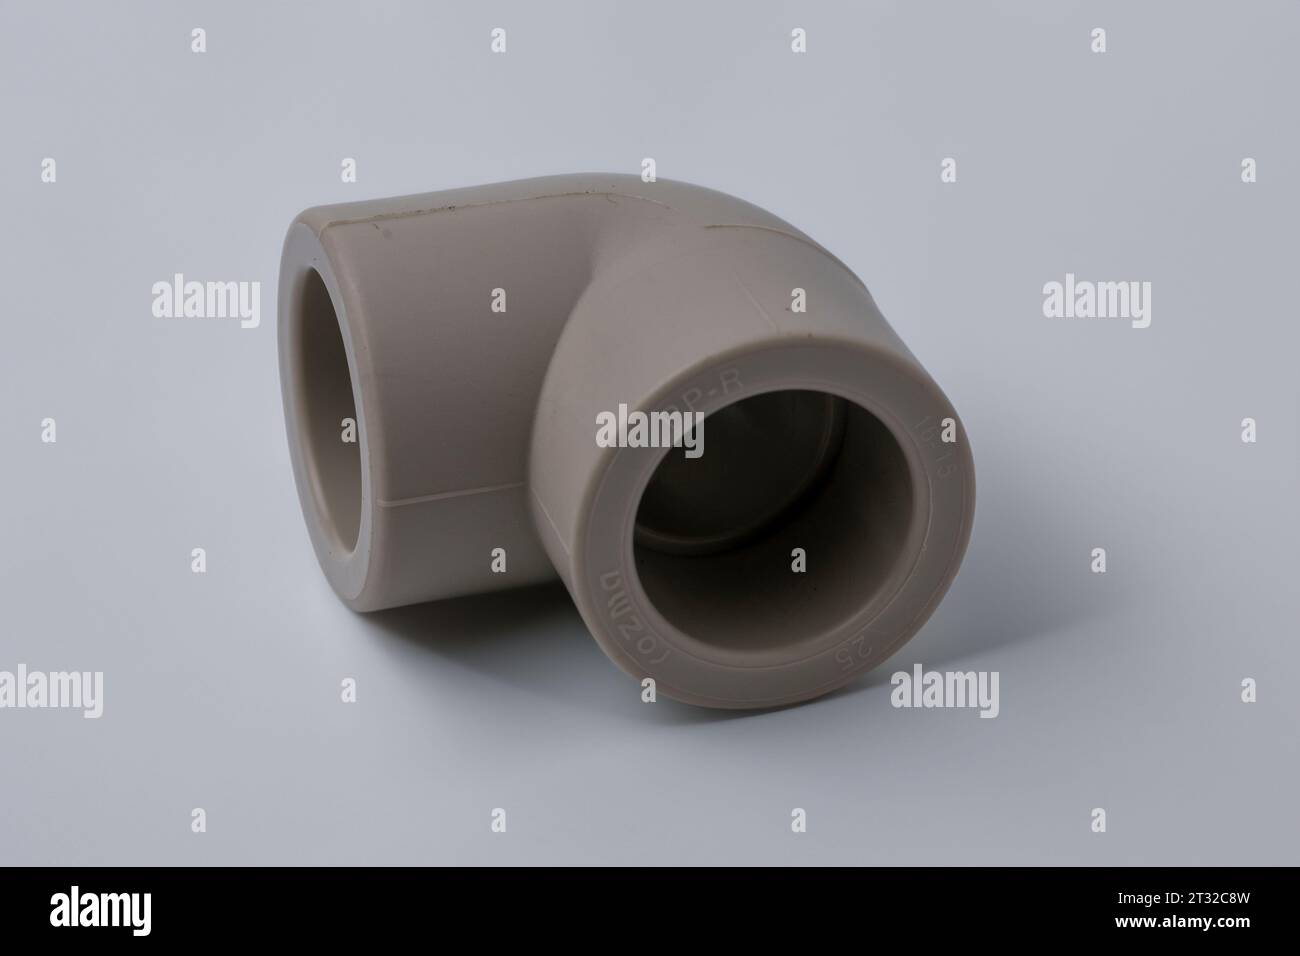 Polypropylene couplings for welding pipes on white. Stock Photo